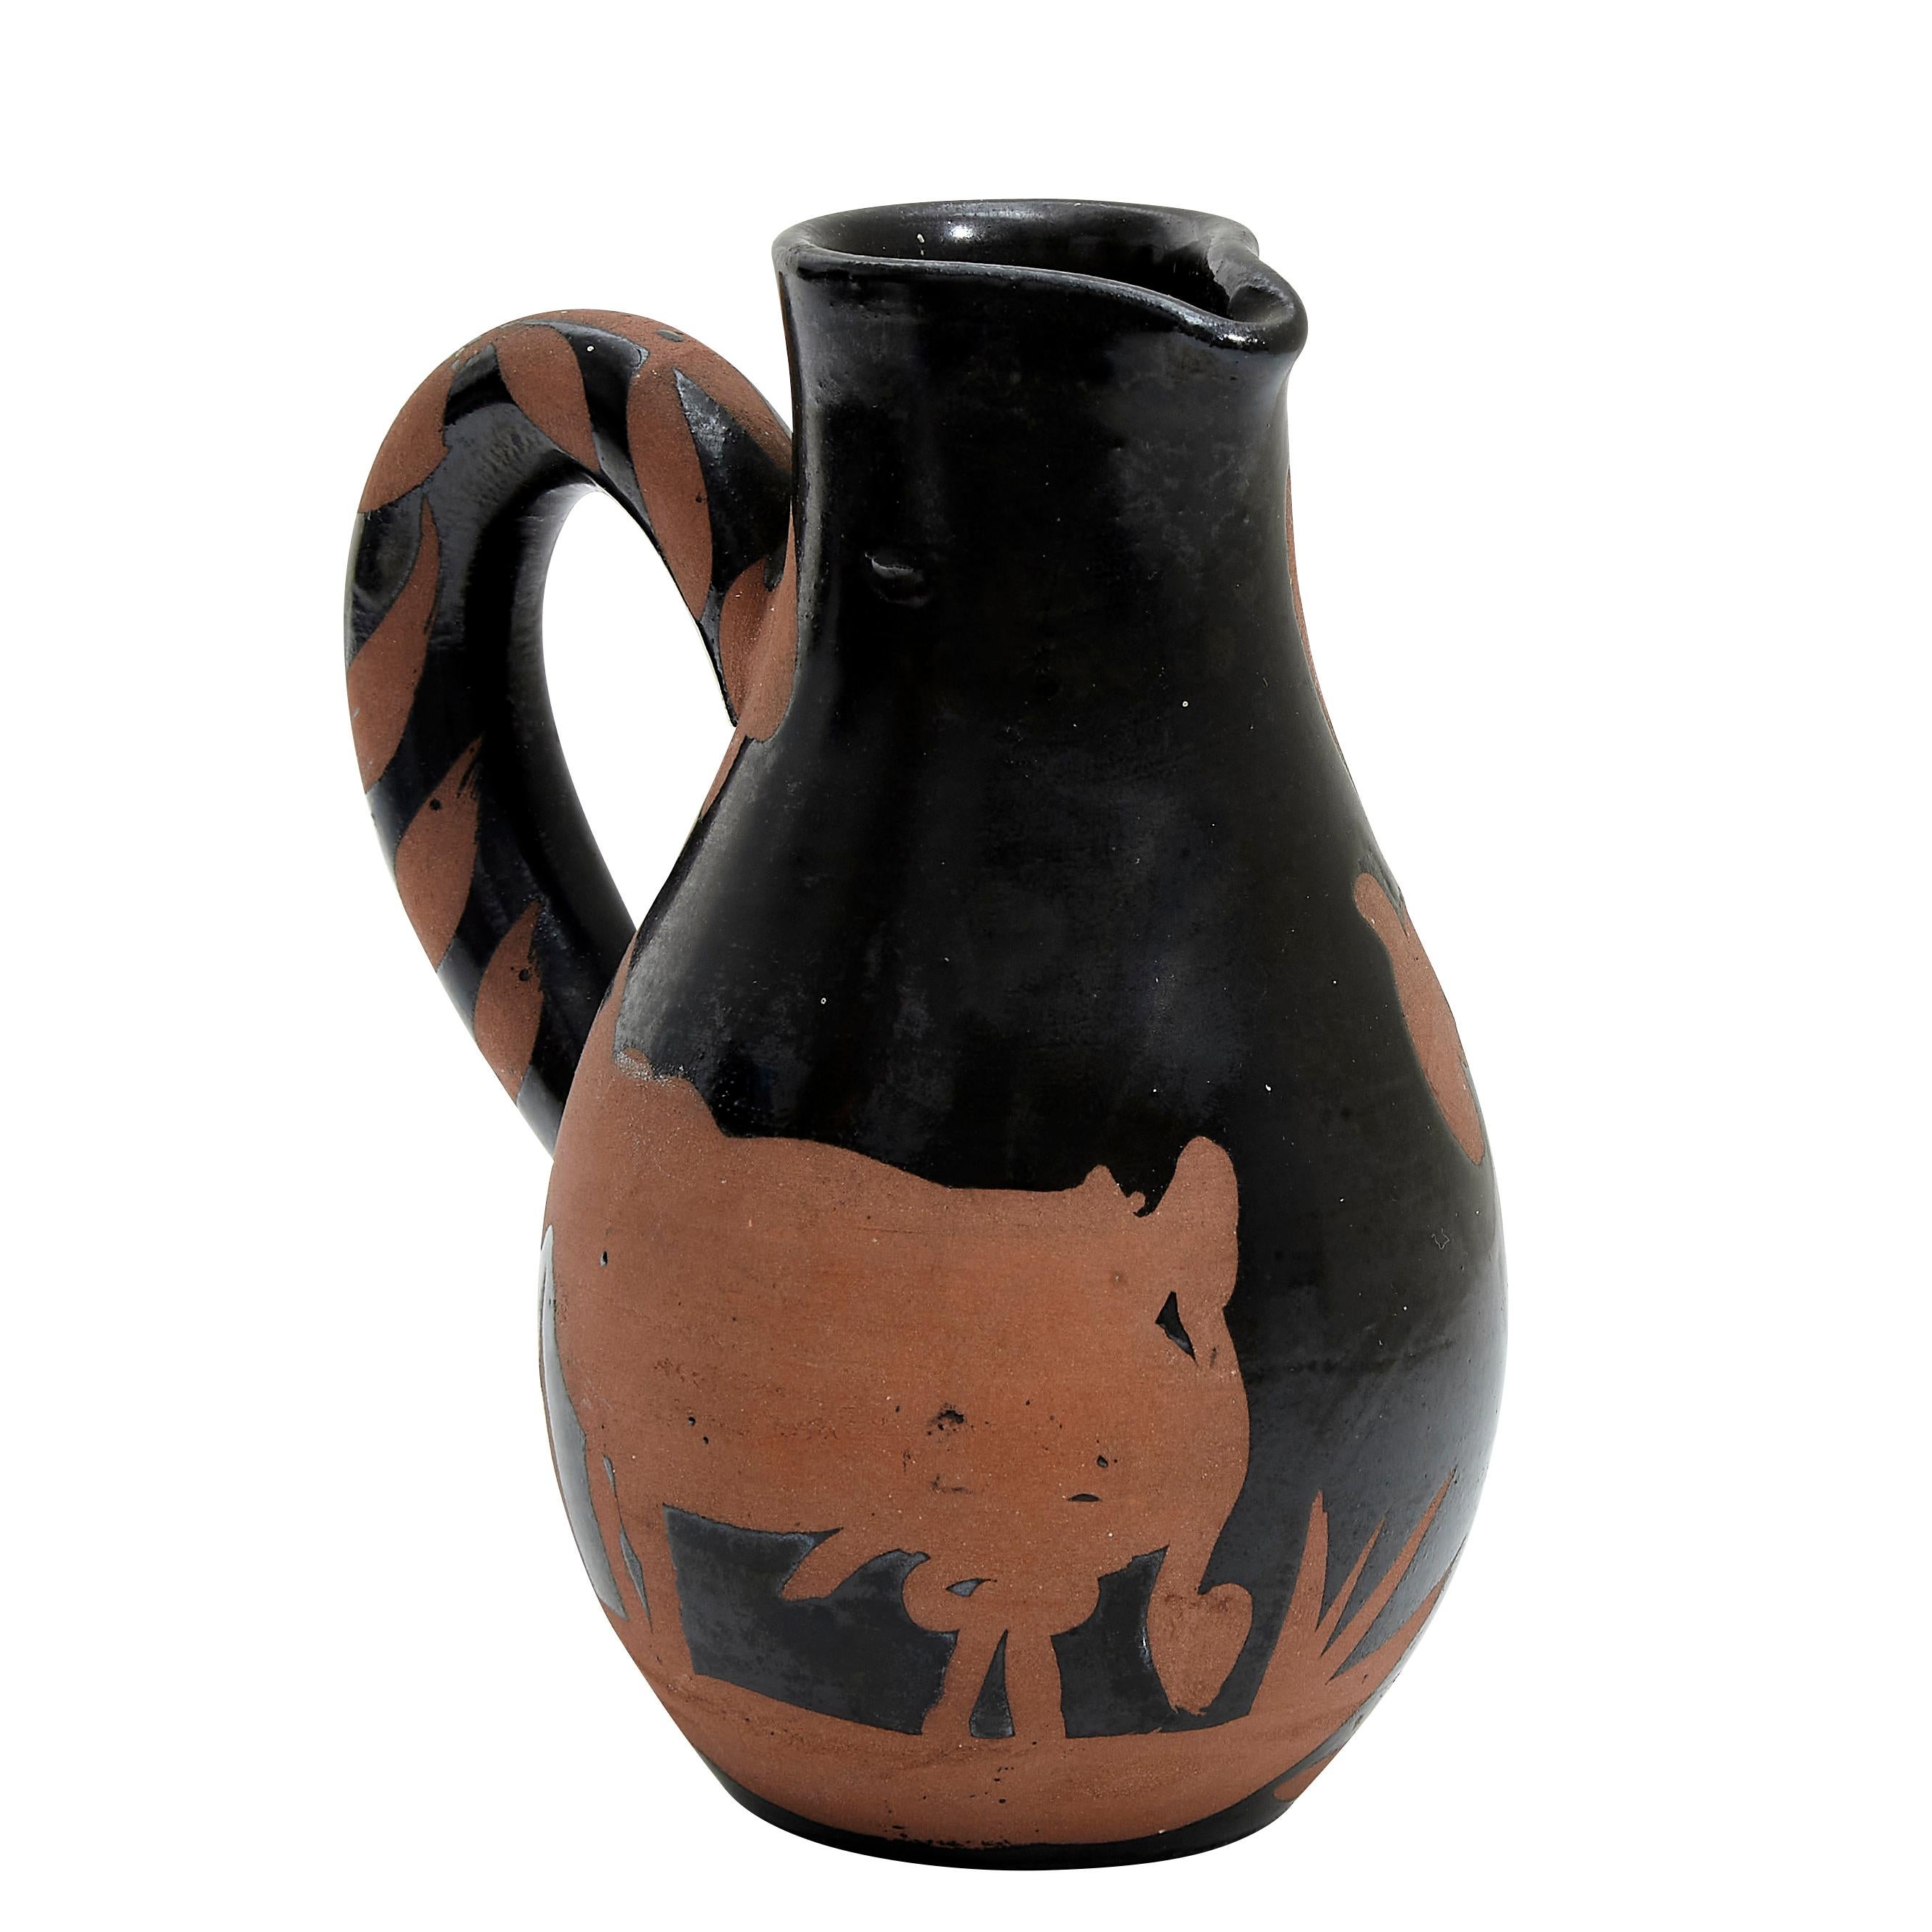 PABLO PICASSO (1881-1973) 
Picador (A. R. 162) 

Terre de faïence pitcher, 1952, from the edition of 500, incised 'Edition Picasso' and 'Madoura', partially glazed and painted.